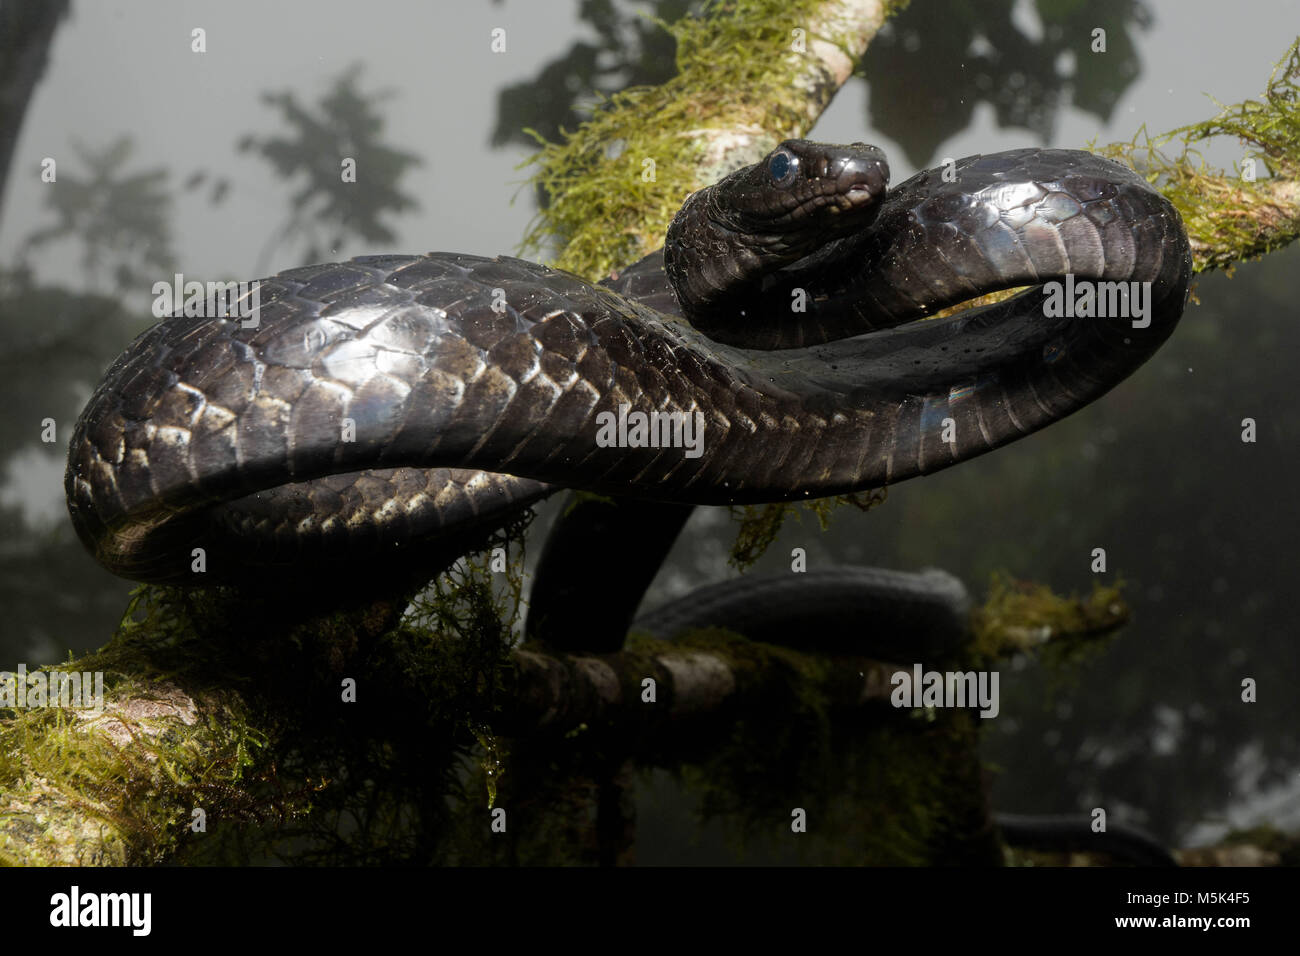 A large Sipo (Chironius grandisquamis) a species of snake from SOuth America, is alert and defensive. Stock Photo